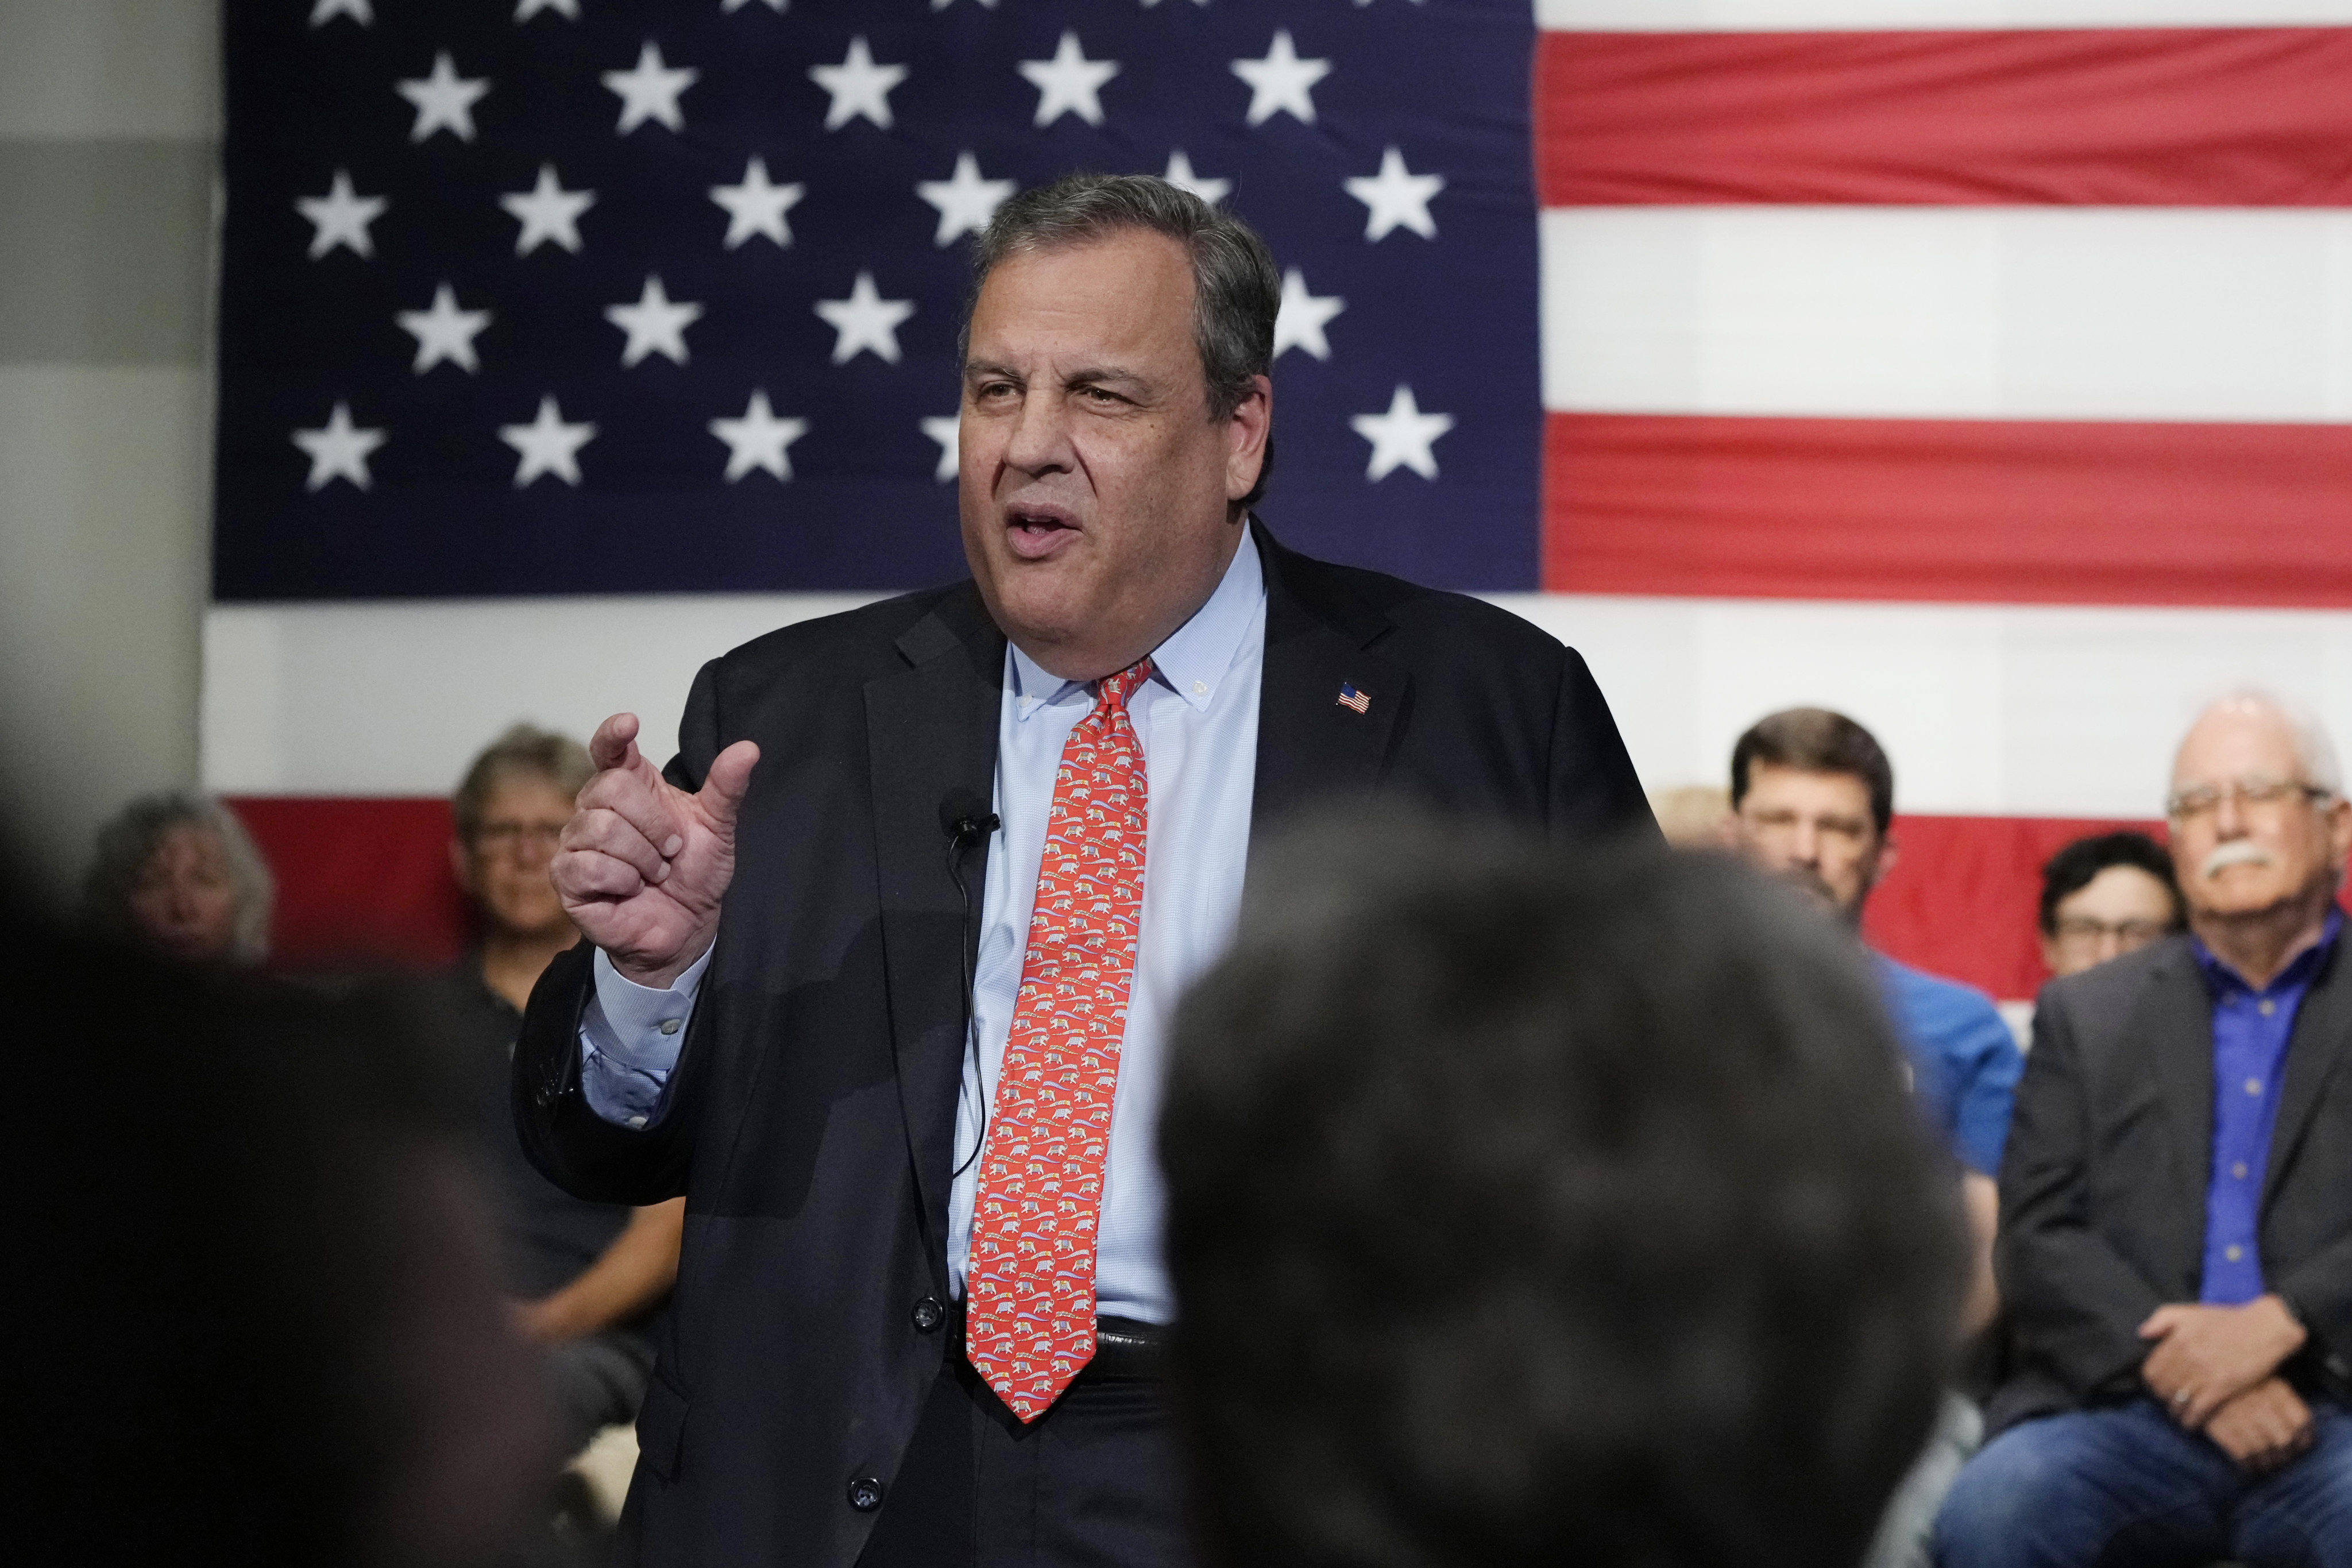 Republican presidential candidate Chris Christie gestures during a gathering in Manchester, New Hampshire, on Tuesday. Photo: AP